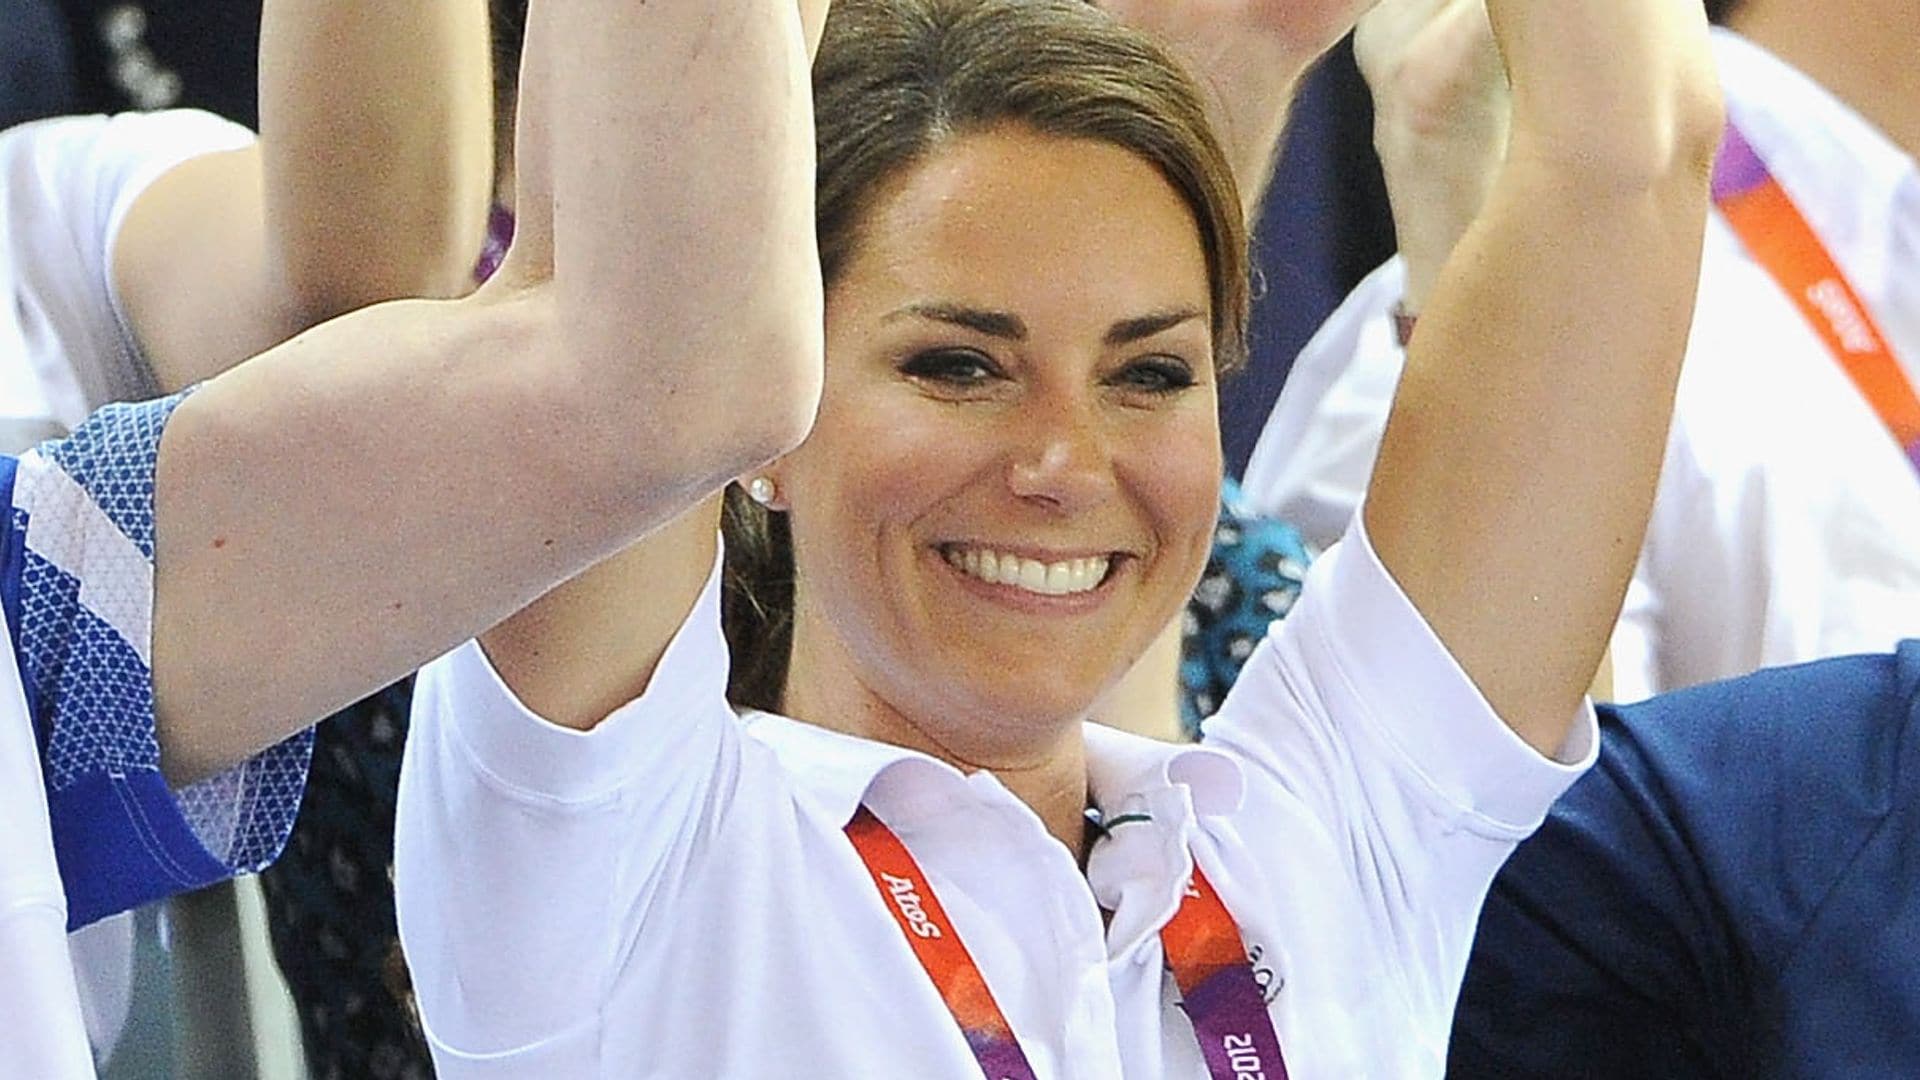 The Princess of Wales at the London Olympics